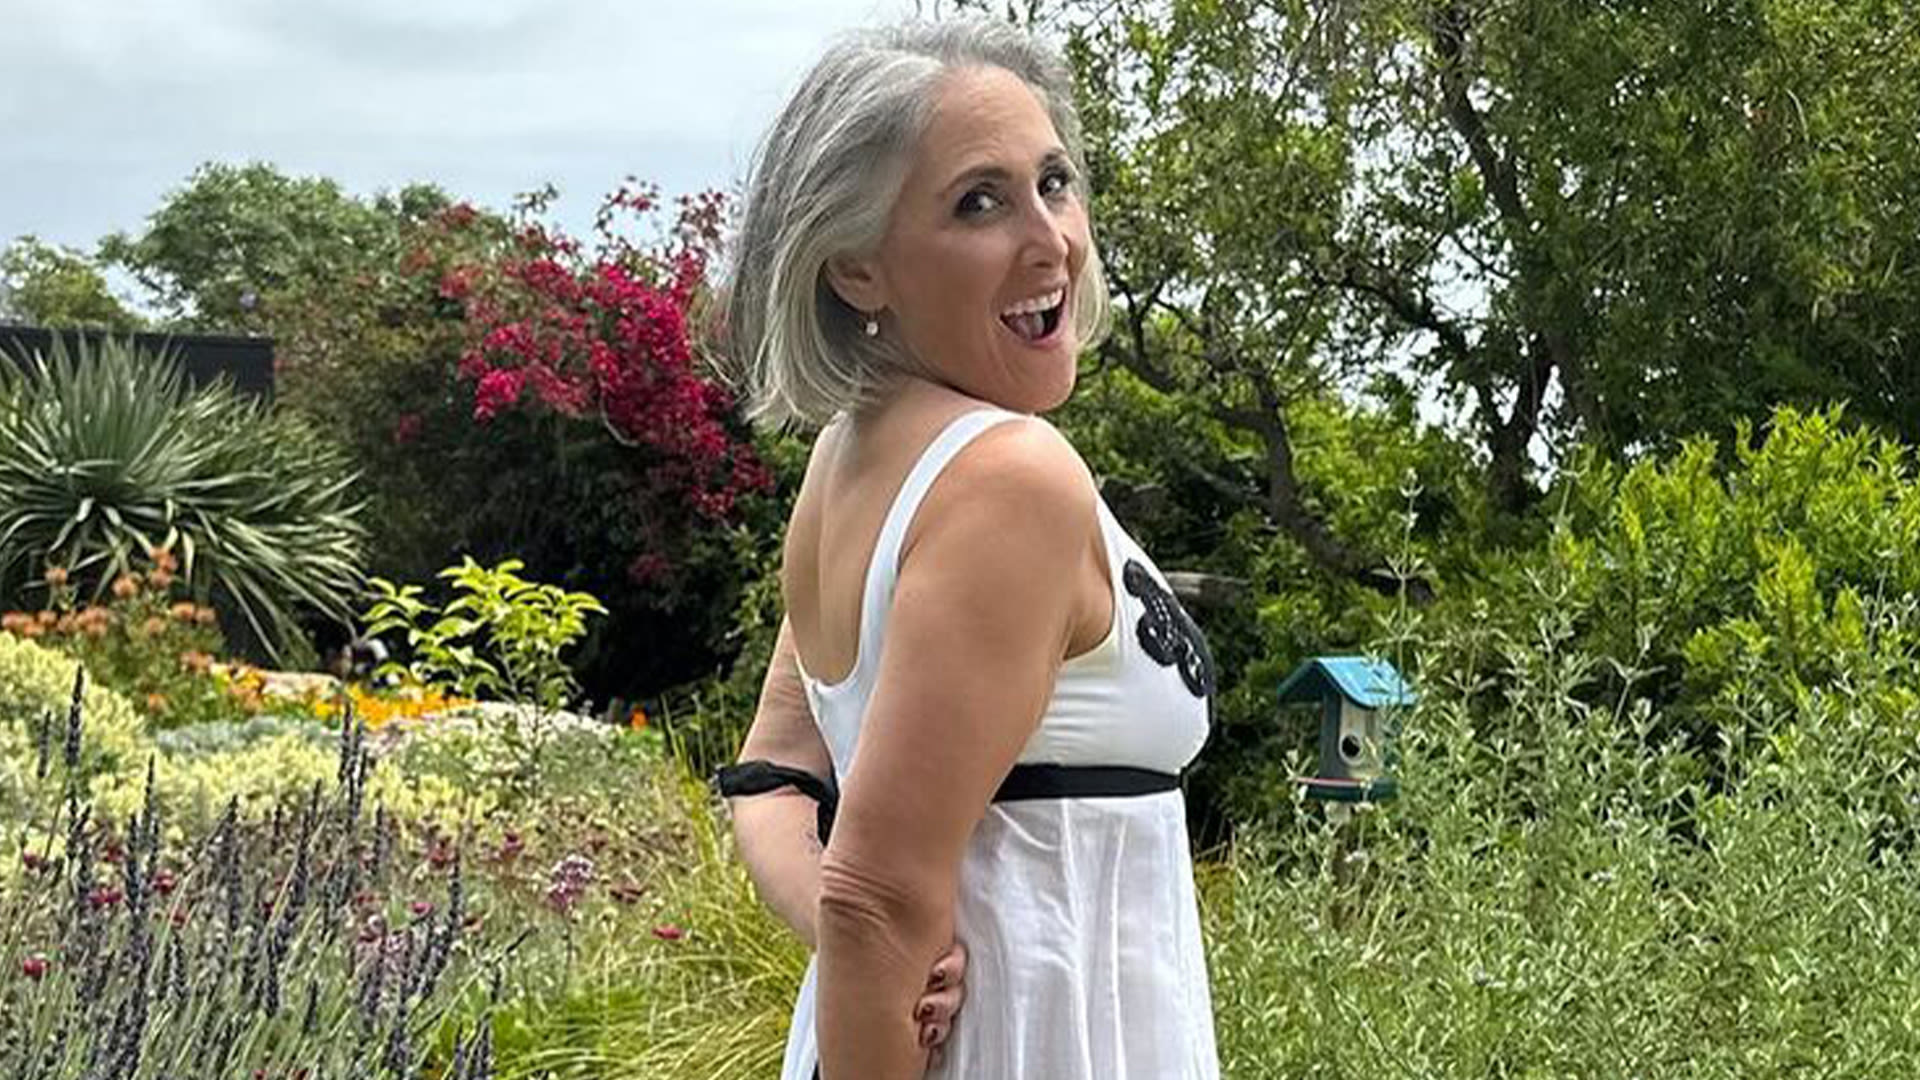 Ricki Lake reveals 35-pound weight loss and feels ‘proud’ after ‘challenge’